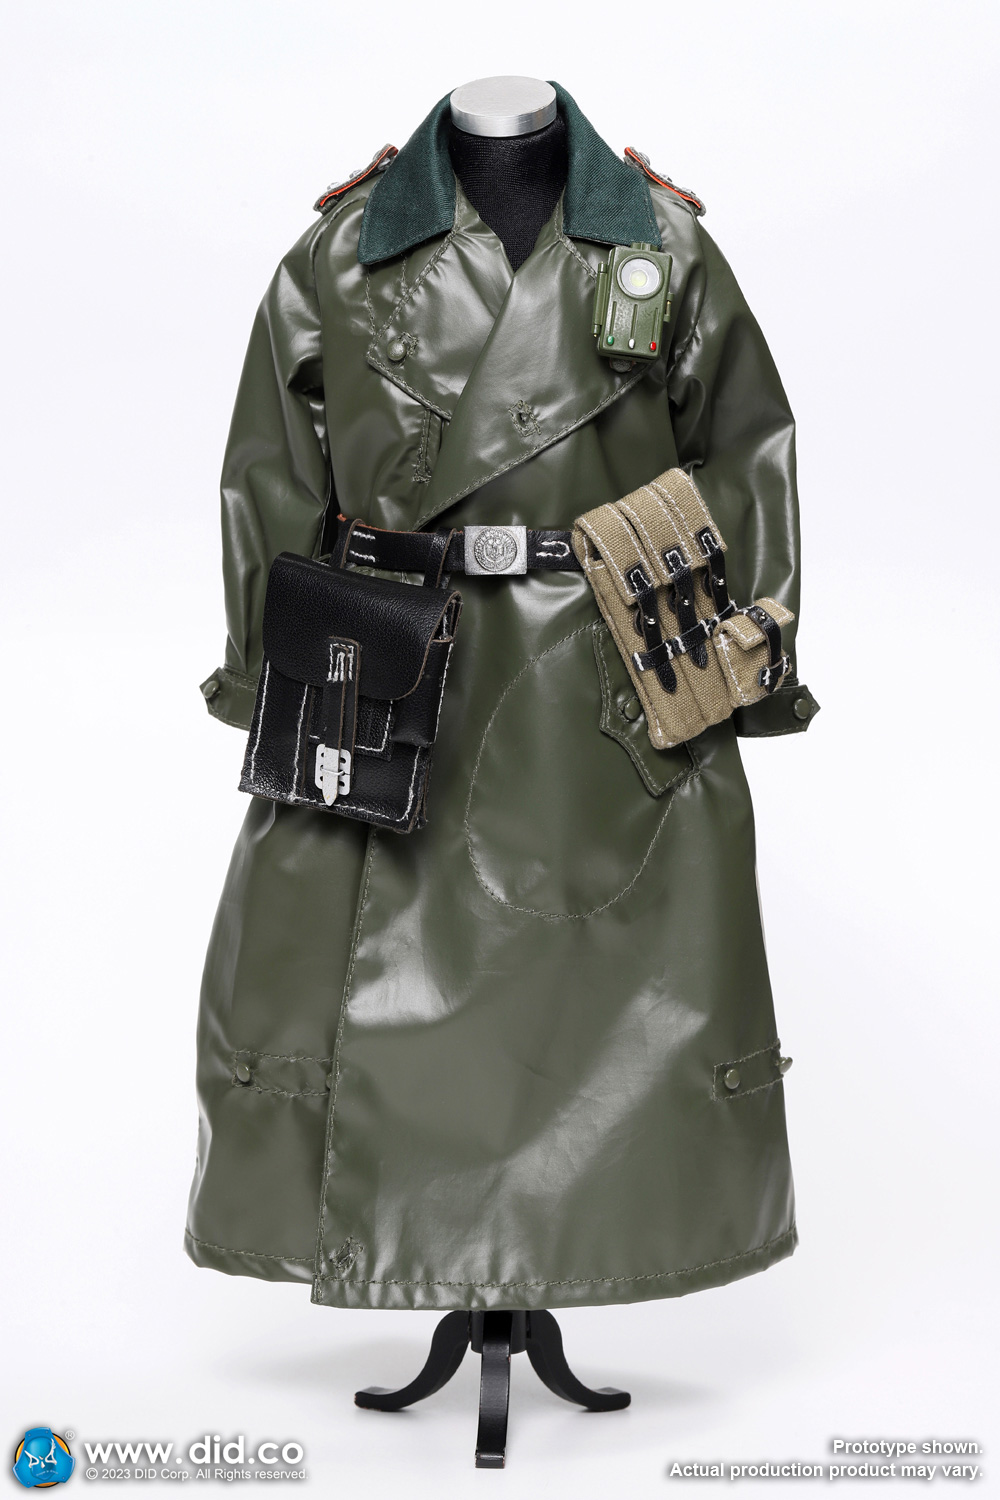 newproduct - NEW PRODUCT: DiD: D80166 WWII German Military Policeman – Richard 1/6 scale action figure 4412